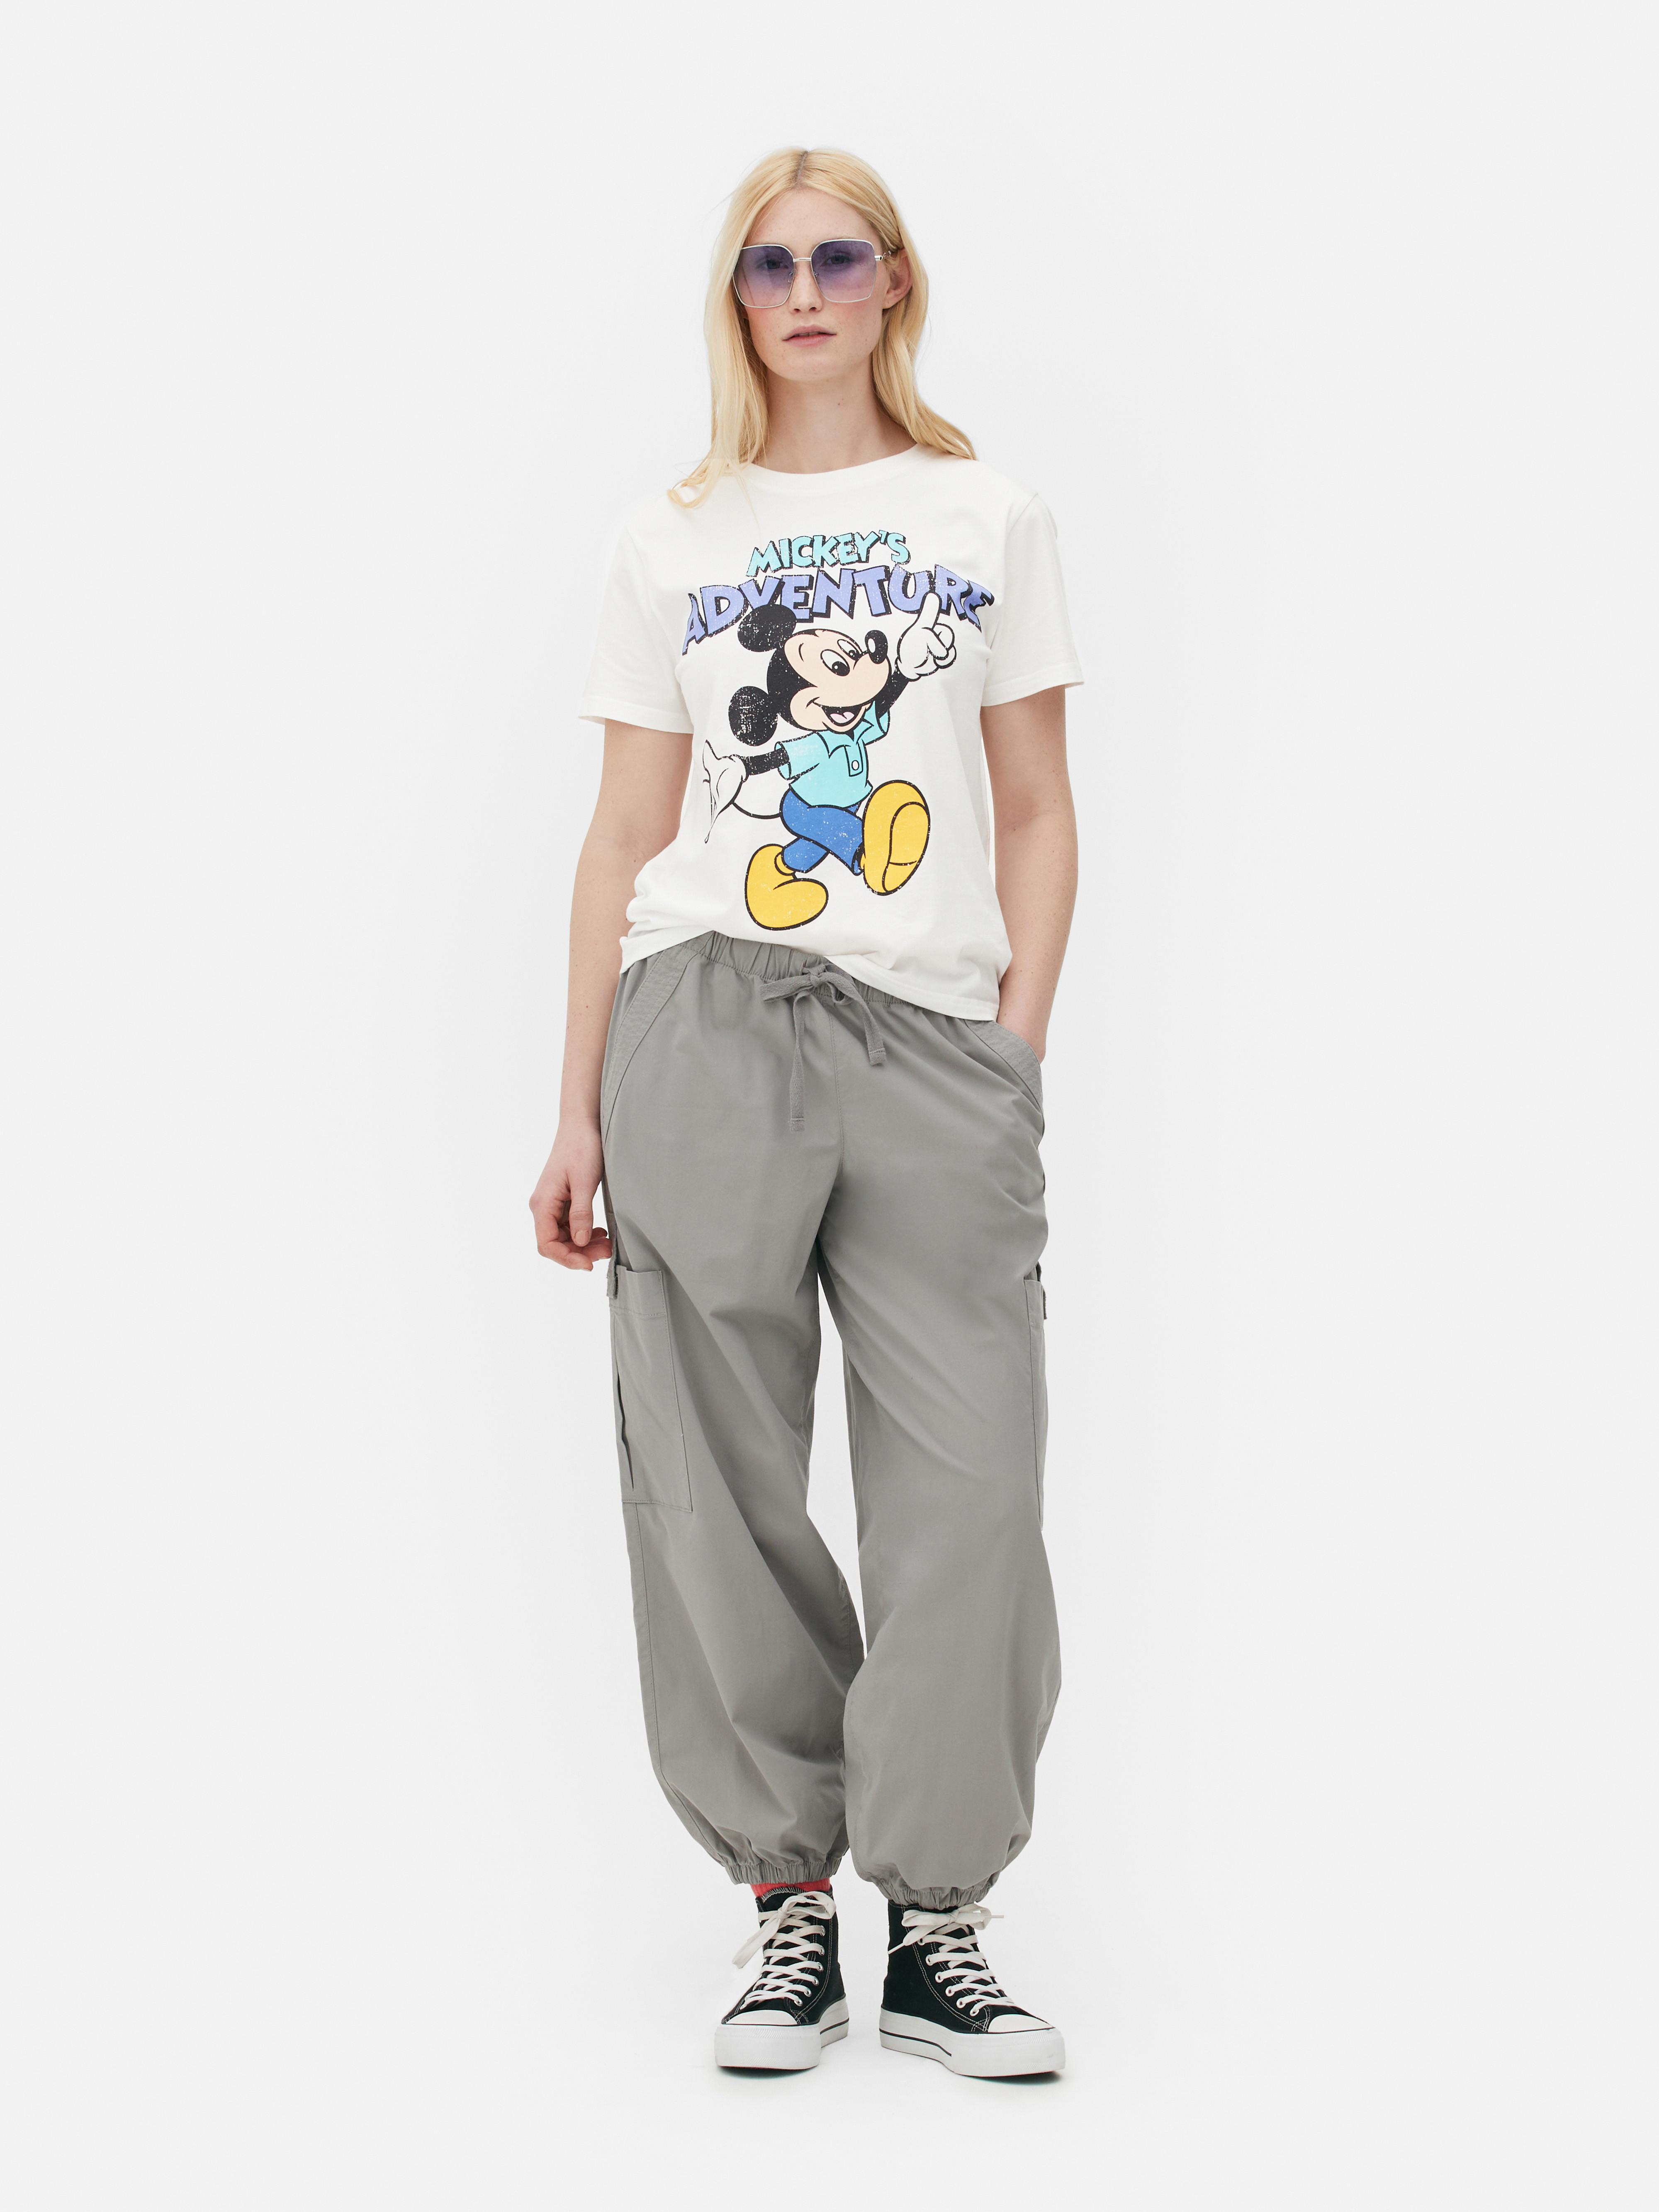 Disney’s Mickey Mouse Printed T-shirt